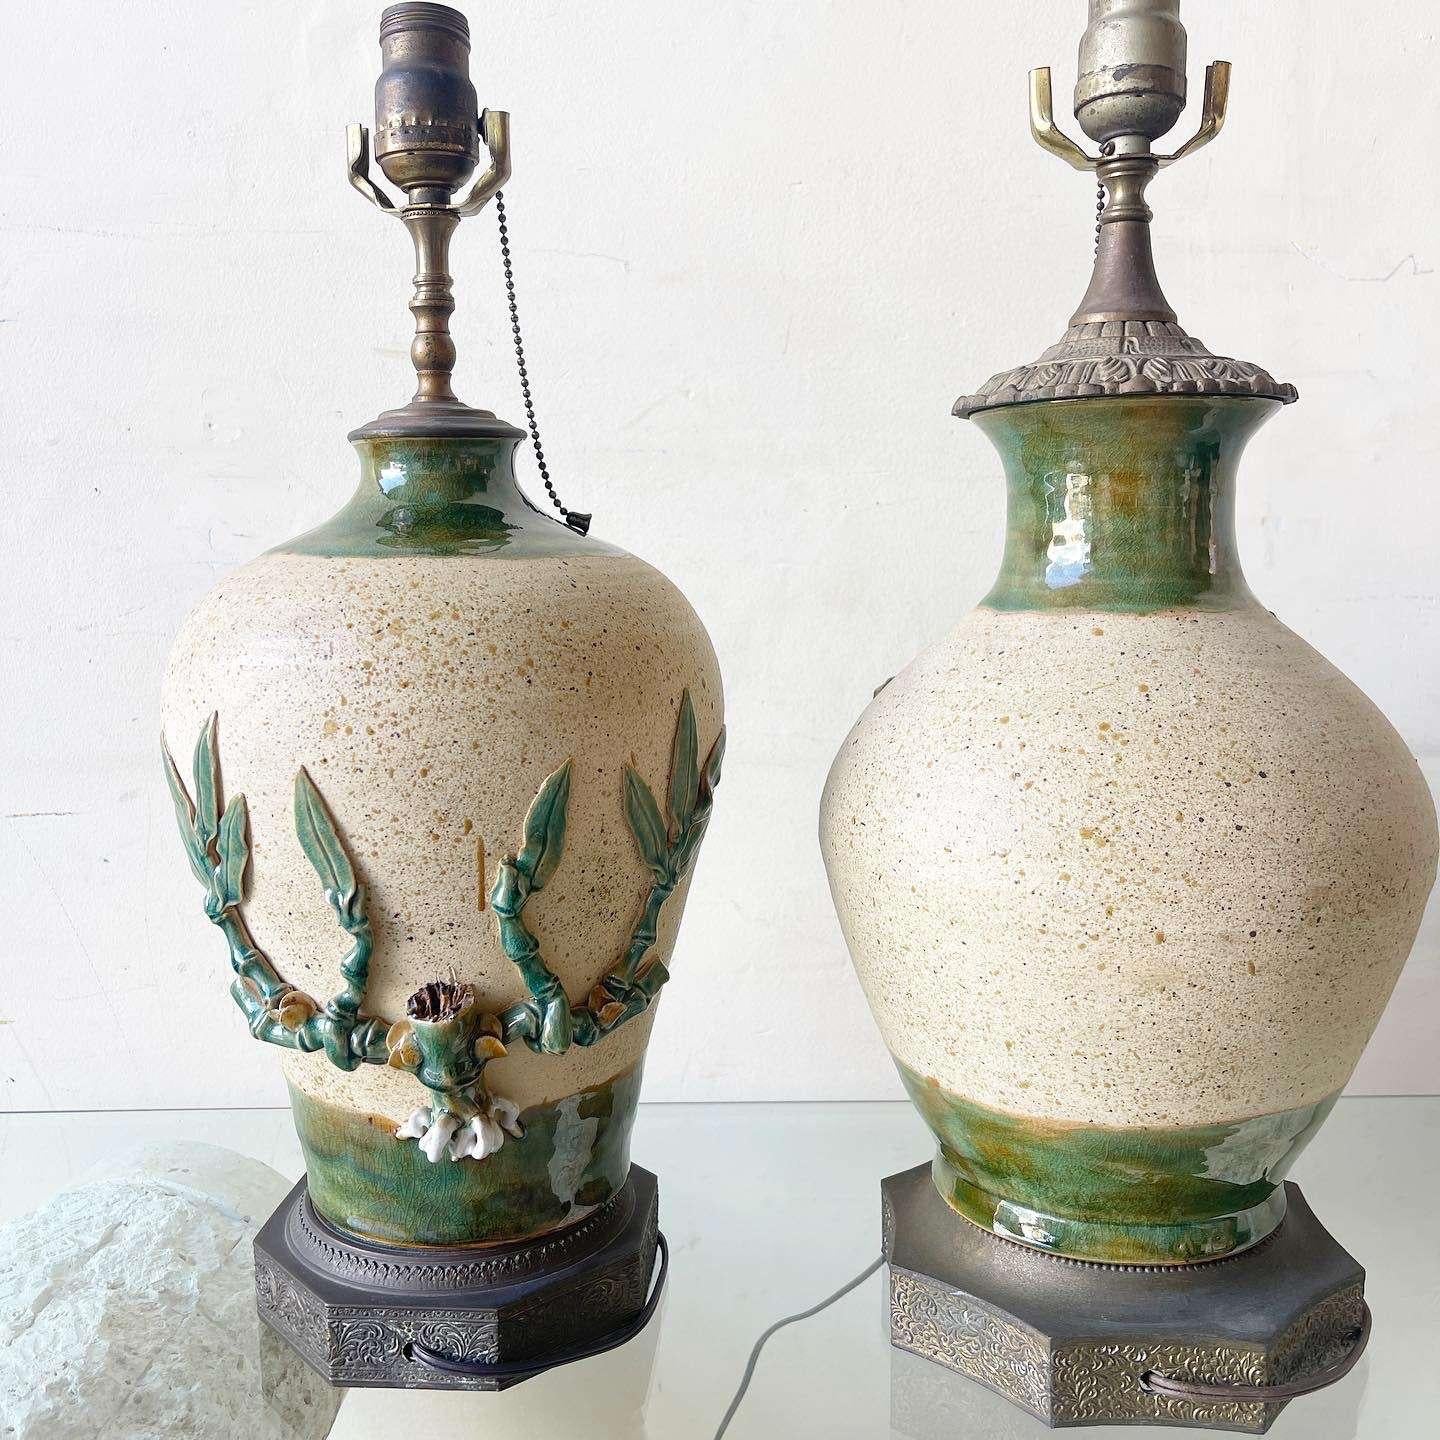 Vintage Ceramic Hand Painted and Sculpted Table Lamps With Brass Bases - a Pair For Sale 1